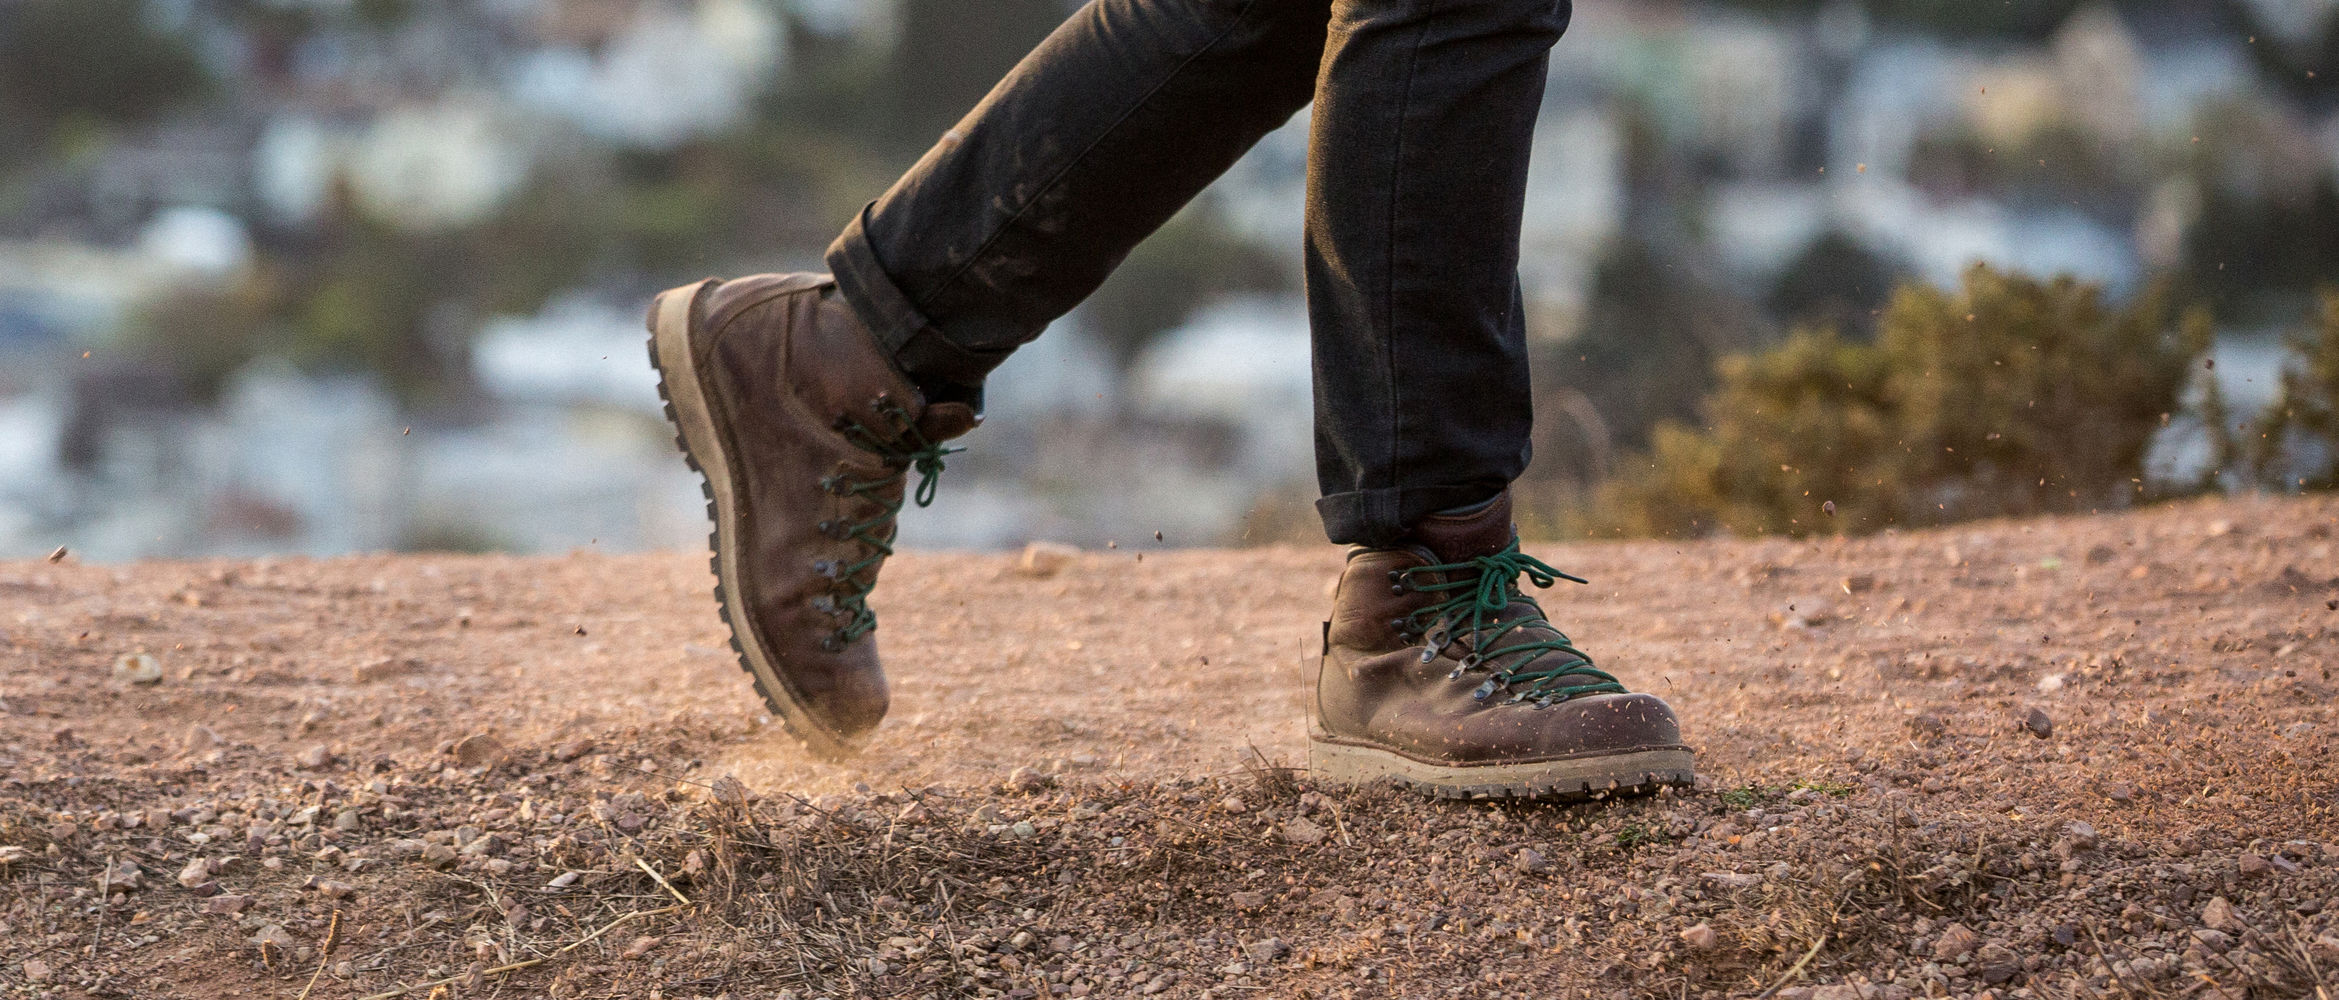 huckberry hiking boots